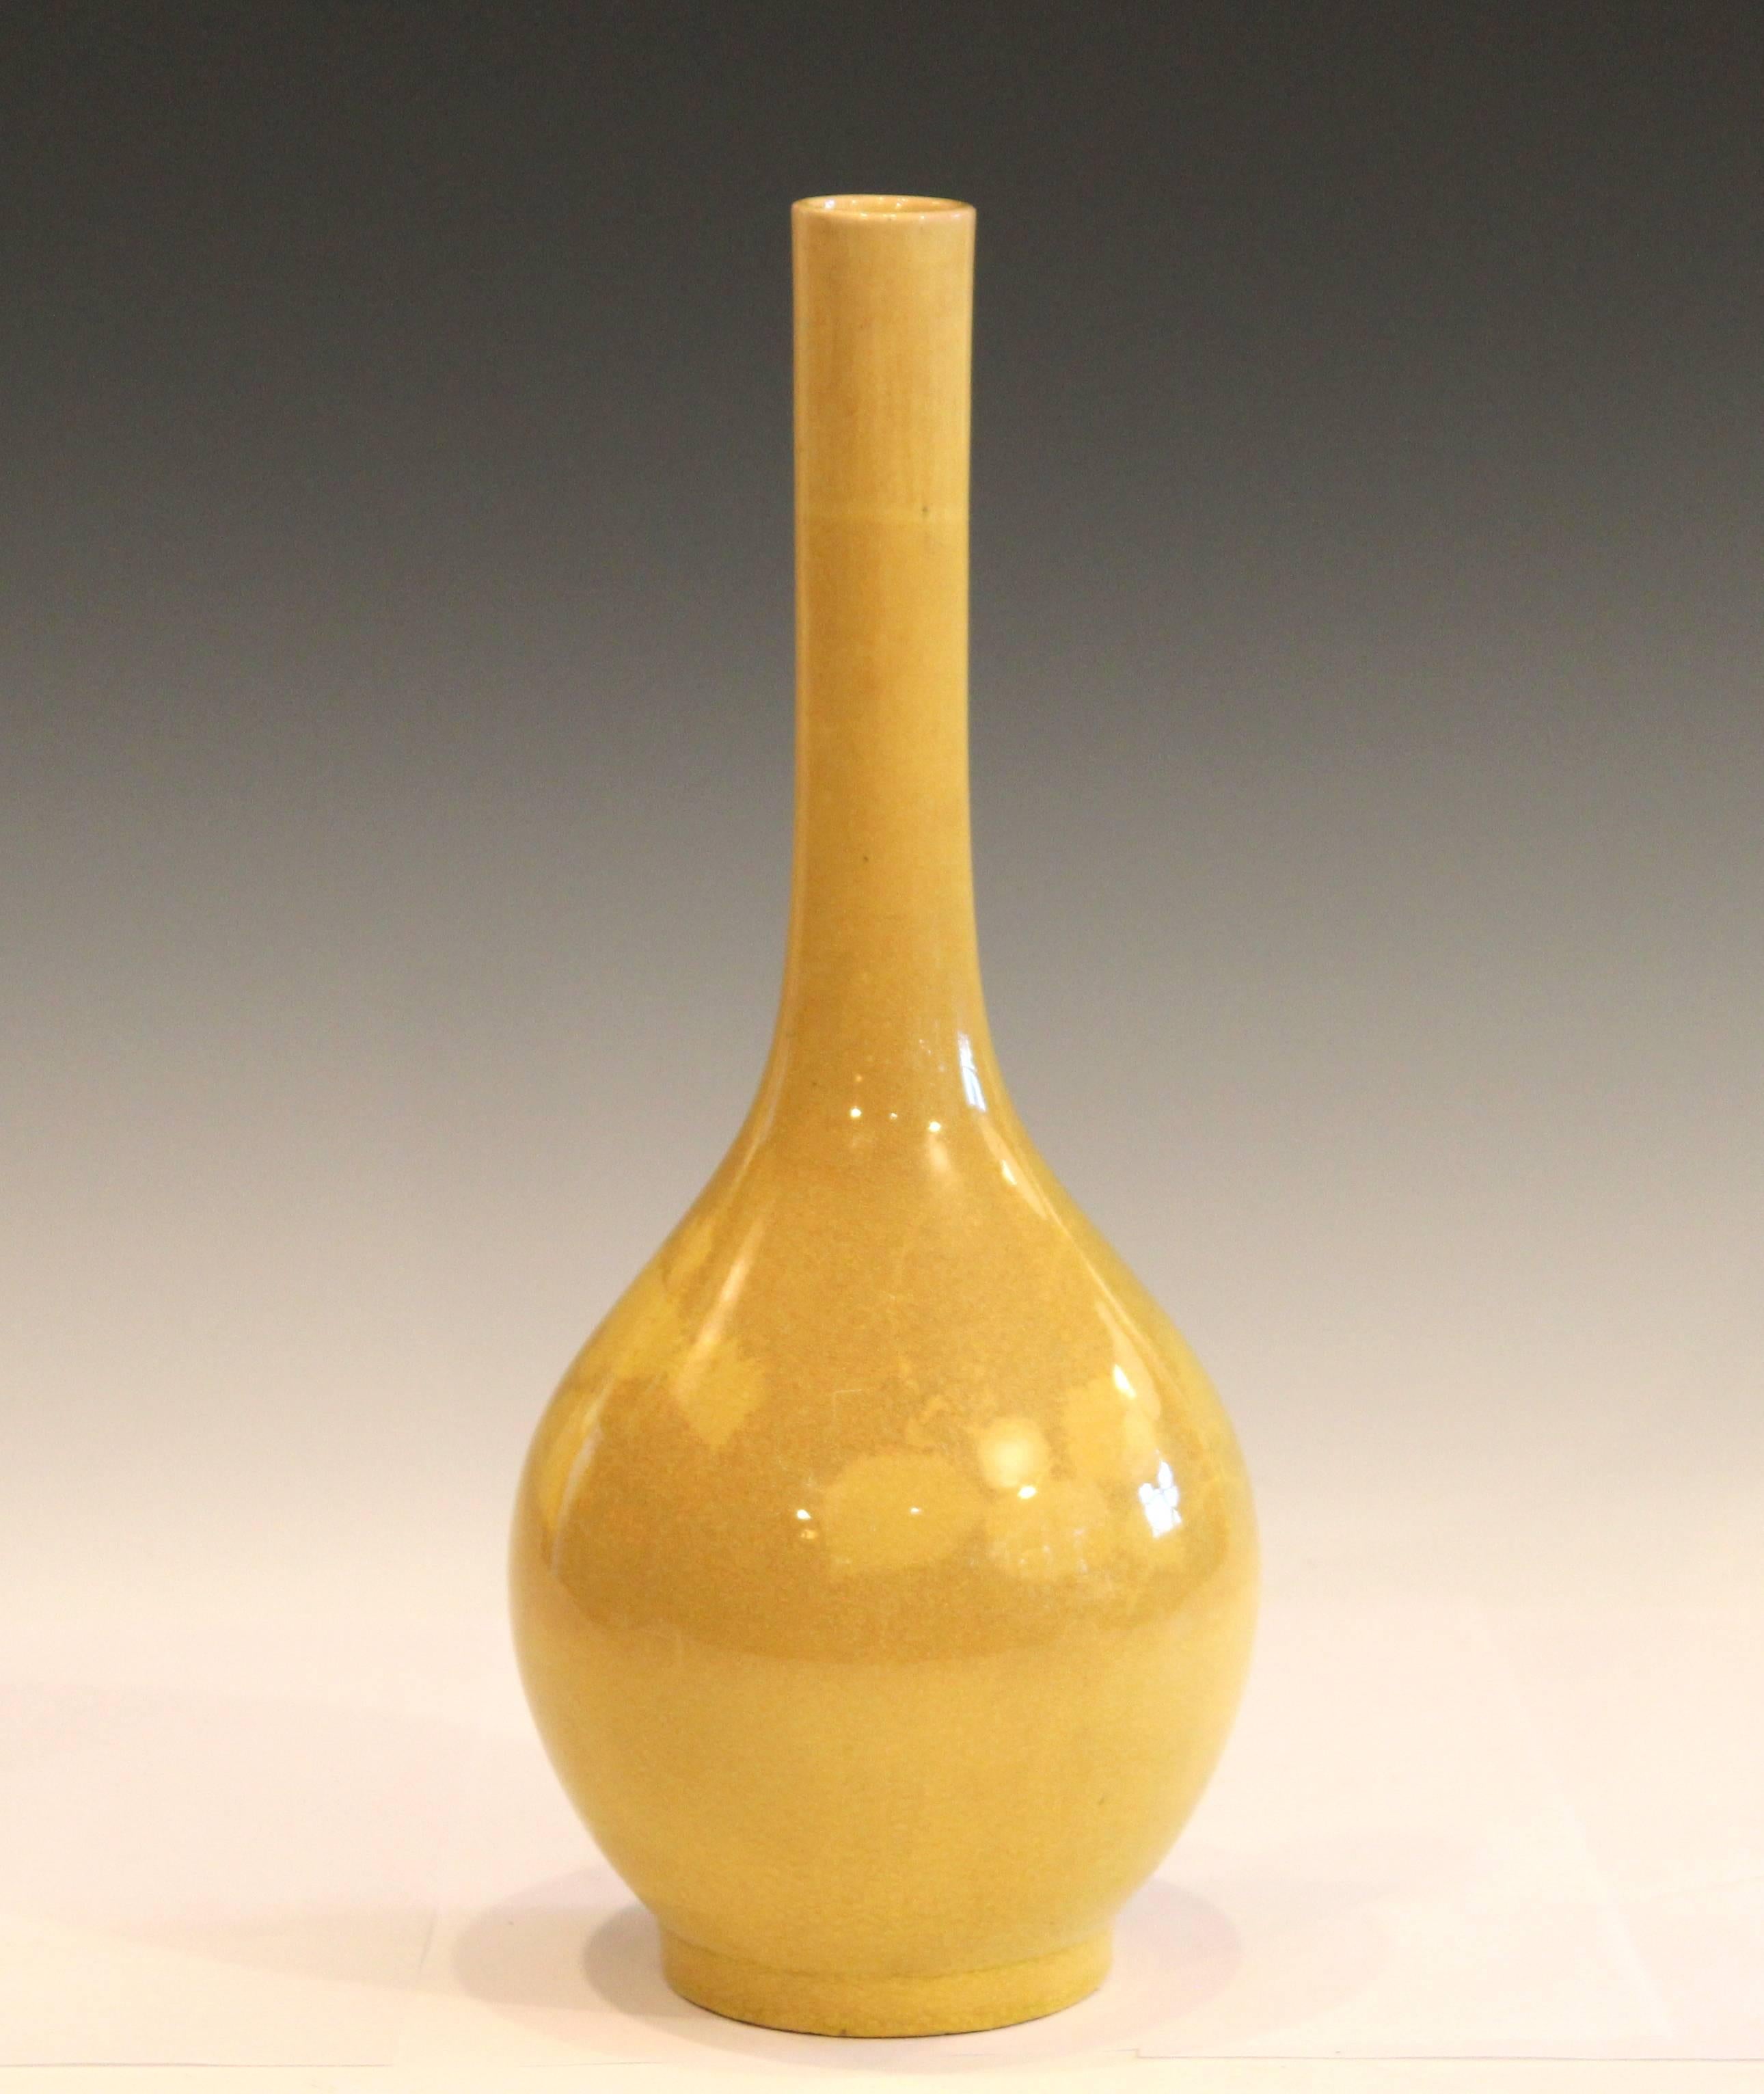 Antique, Kyoto Awaji pottery bottle vase with brilliant acid yellow monochrome crackle glaze, circa very early 20th century. Measures: 12